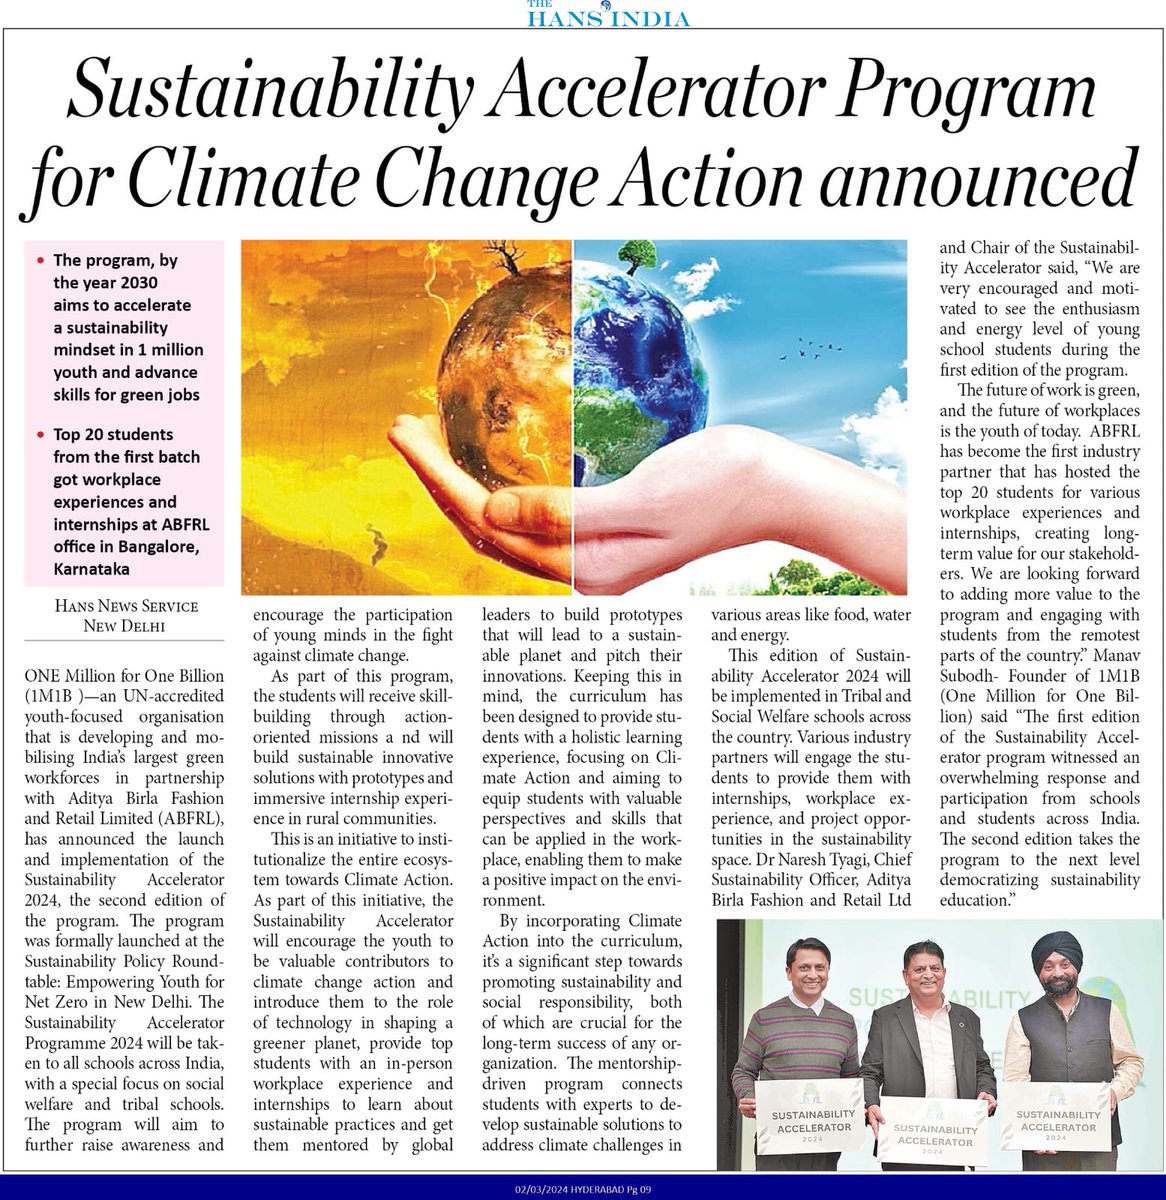 🌍 Exciting News! #1M1B unveils the 2nd edition of the Sustainability Accelerator 2024 in collaboration with @AdityaBirlaGrp Fashion and Retail Limited! Launched during the Sustainability Policy Roundtable, this initiative aims to empower youth for a #NetZero future. 📚 The…